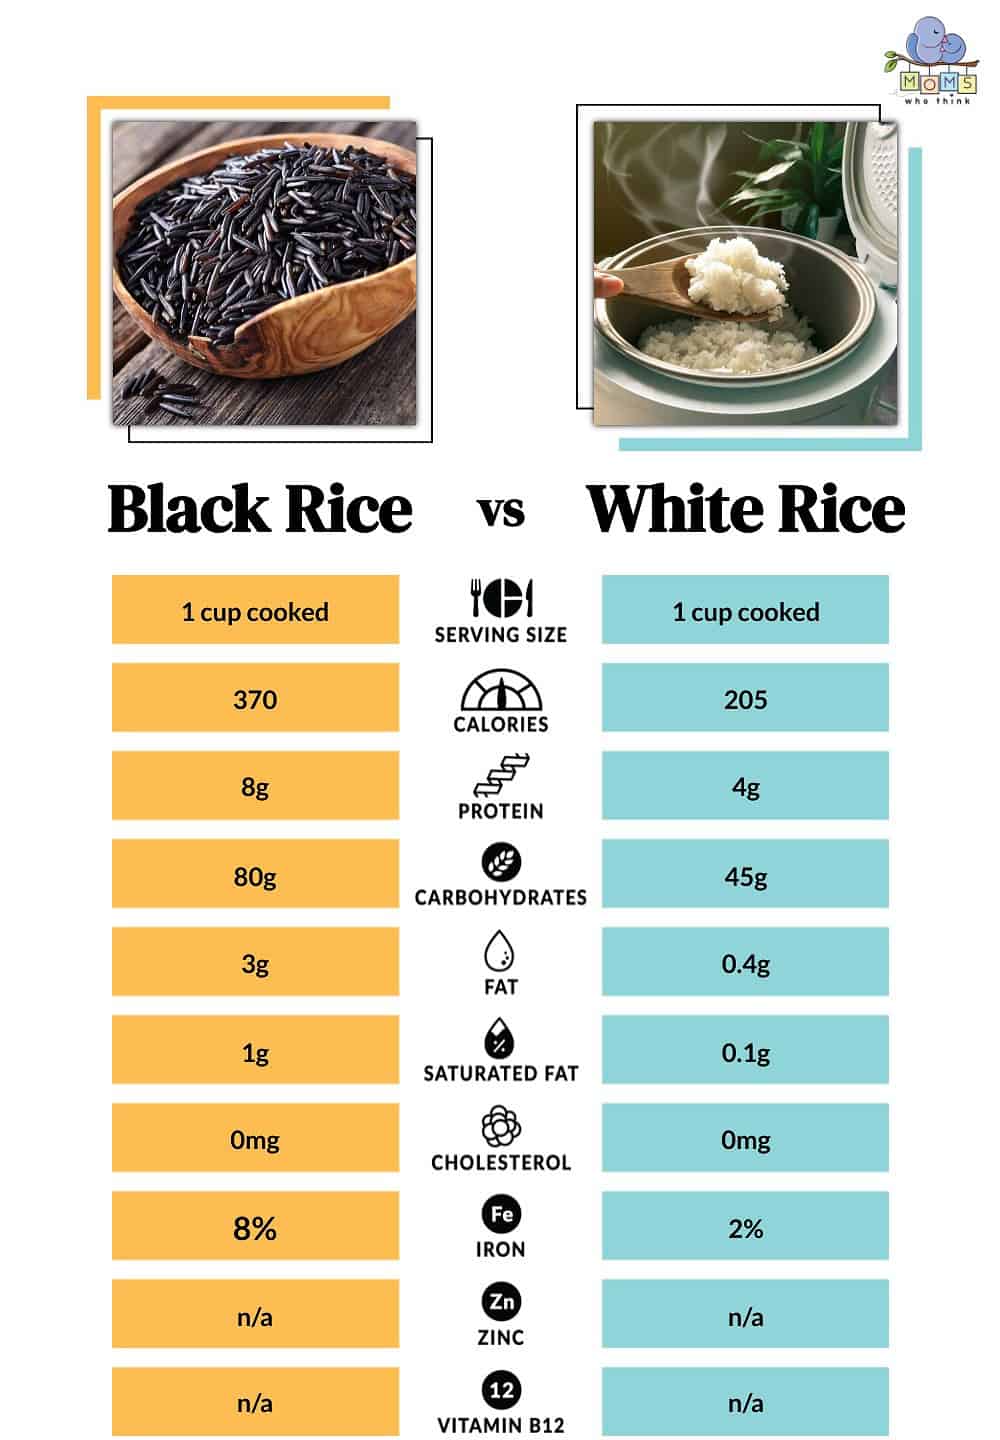 Black Rice vs White Rice Nutritional Facts